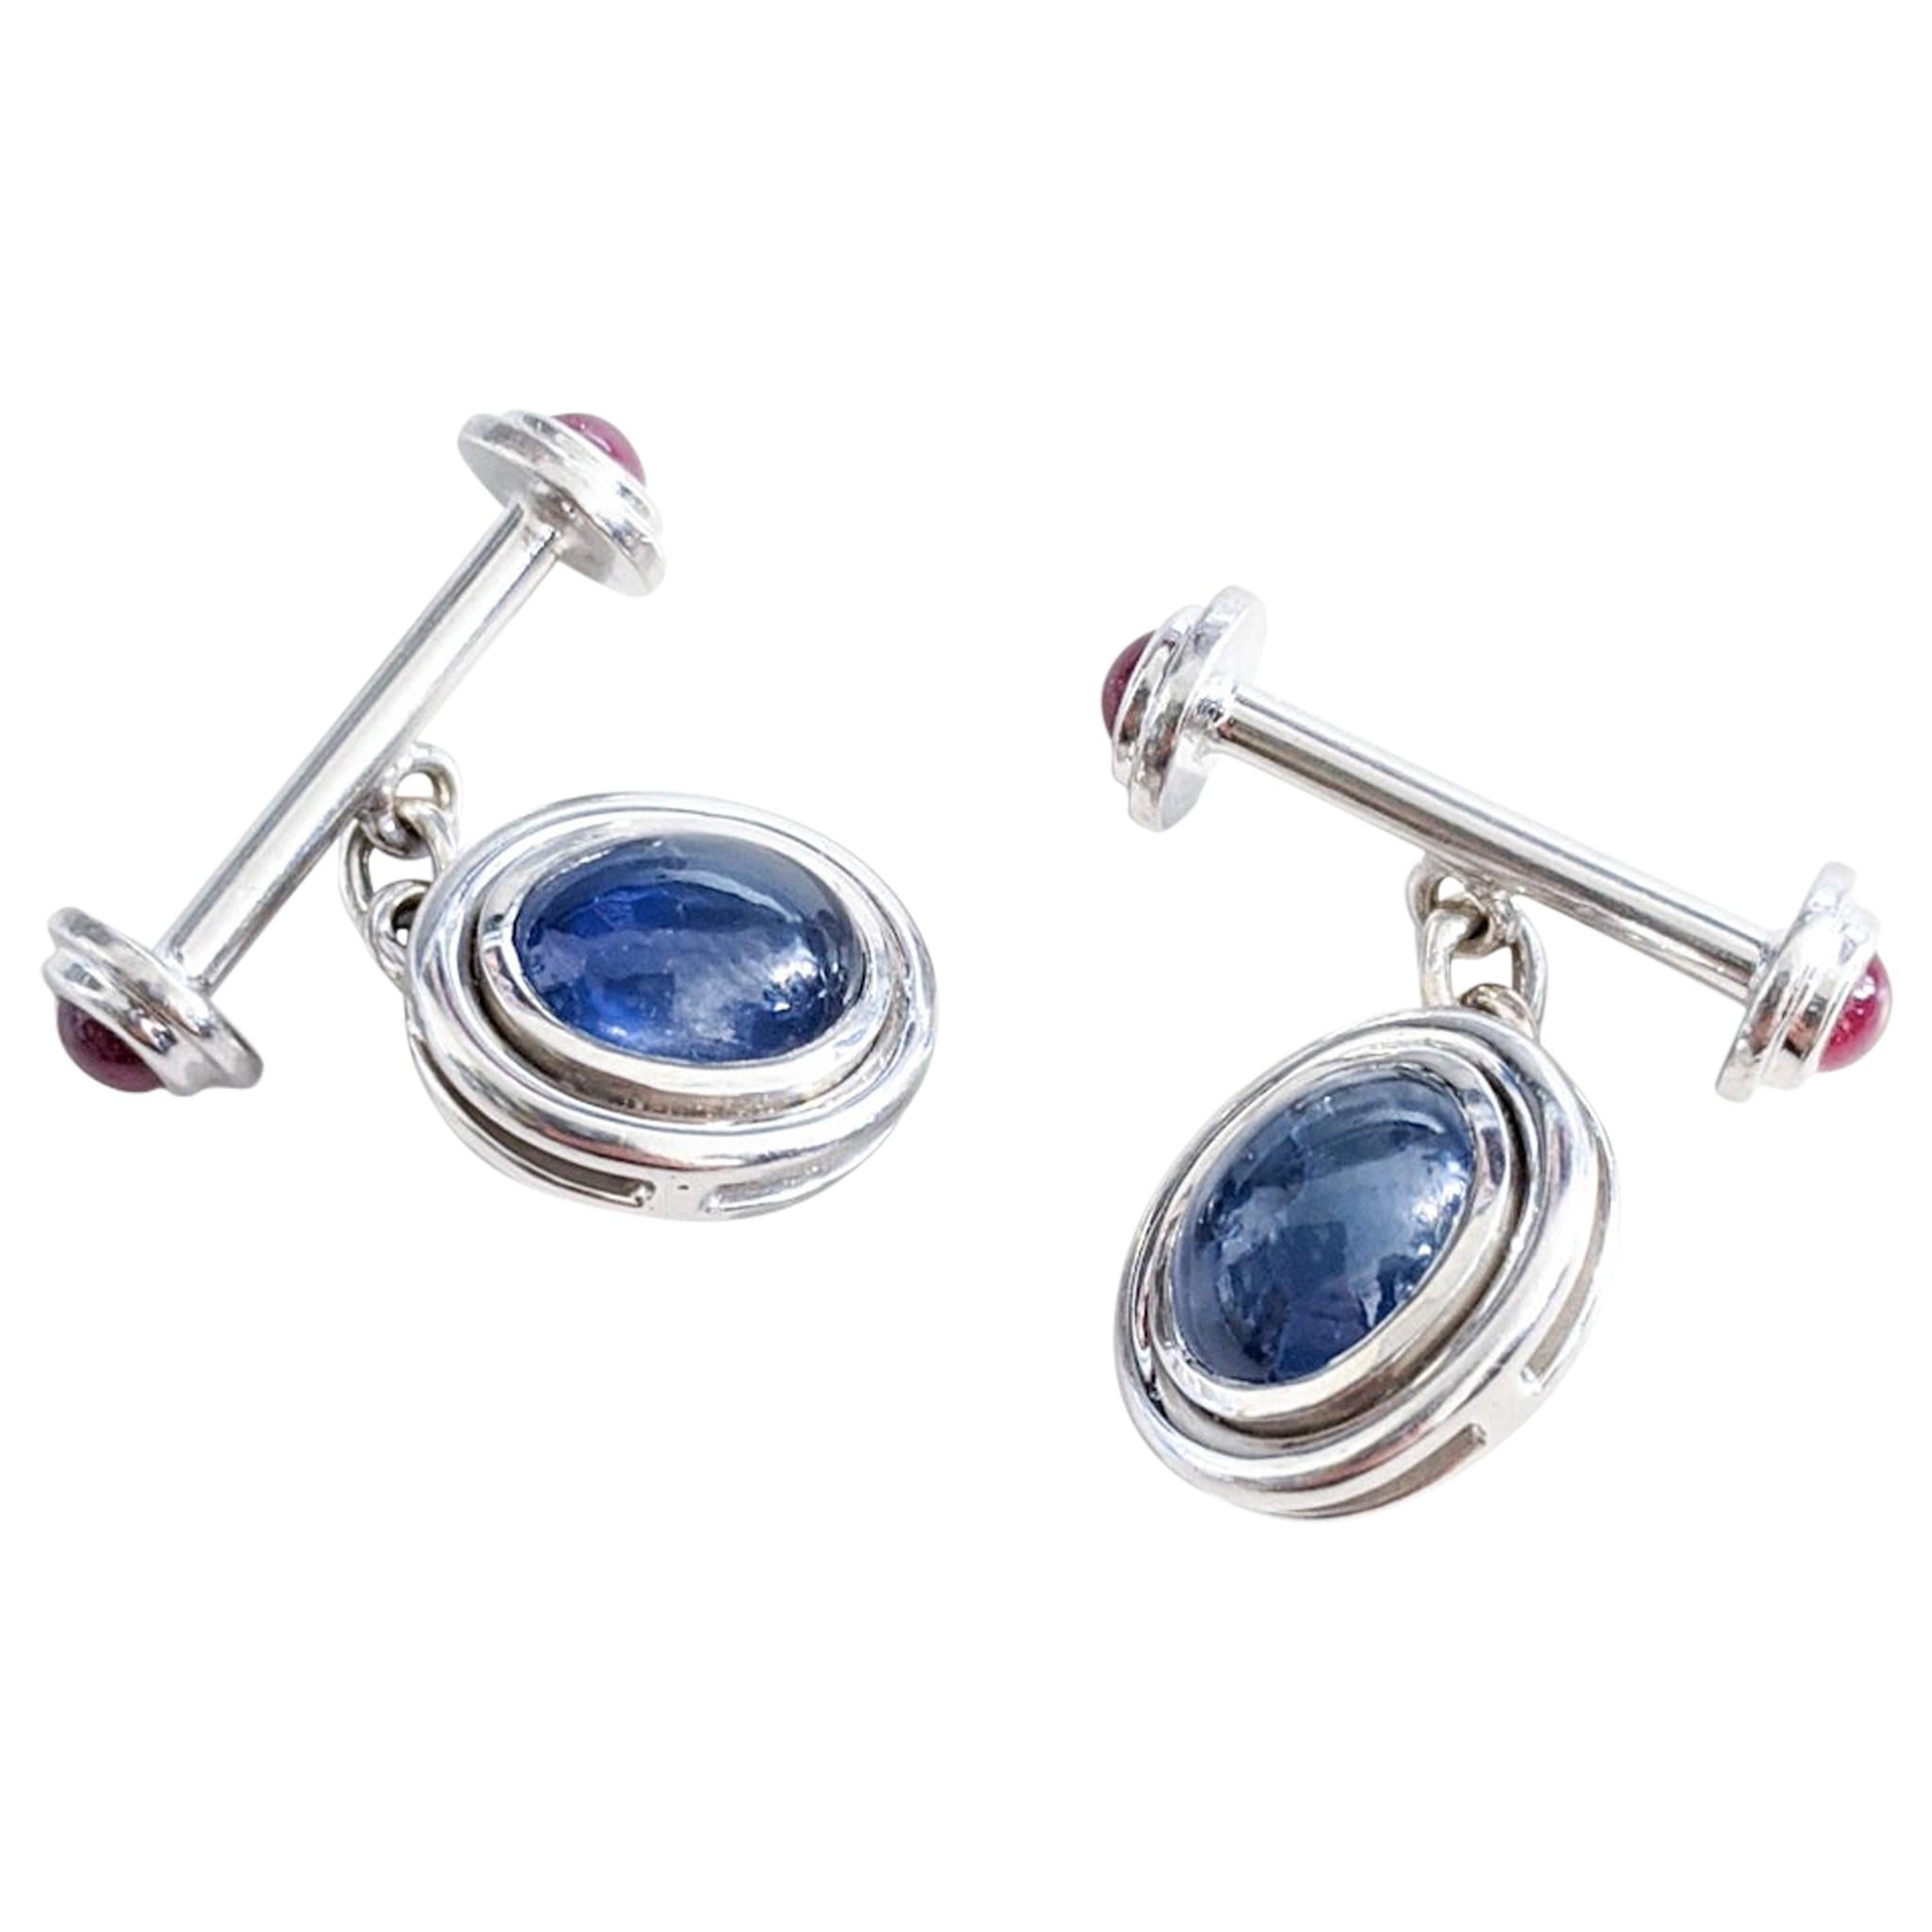 2 Carat Sapphire Cabochon and 18 Karat White Gold Cufflinks For Sale